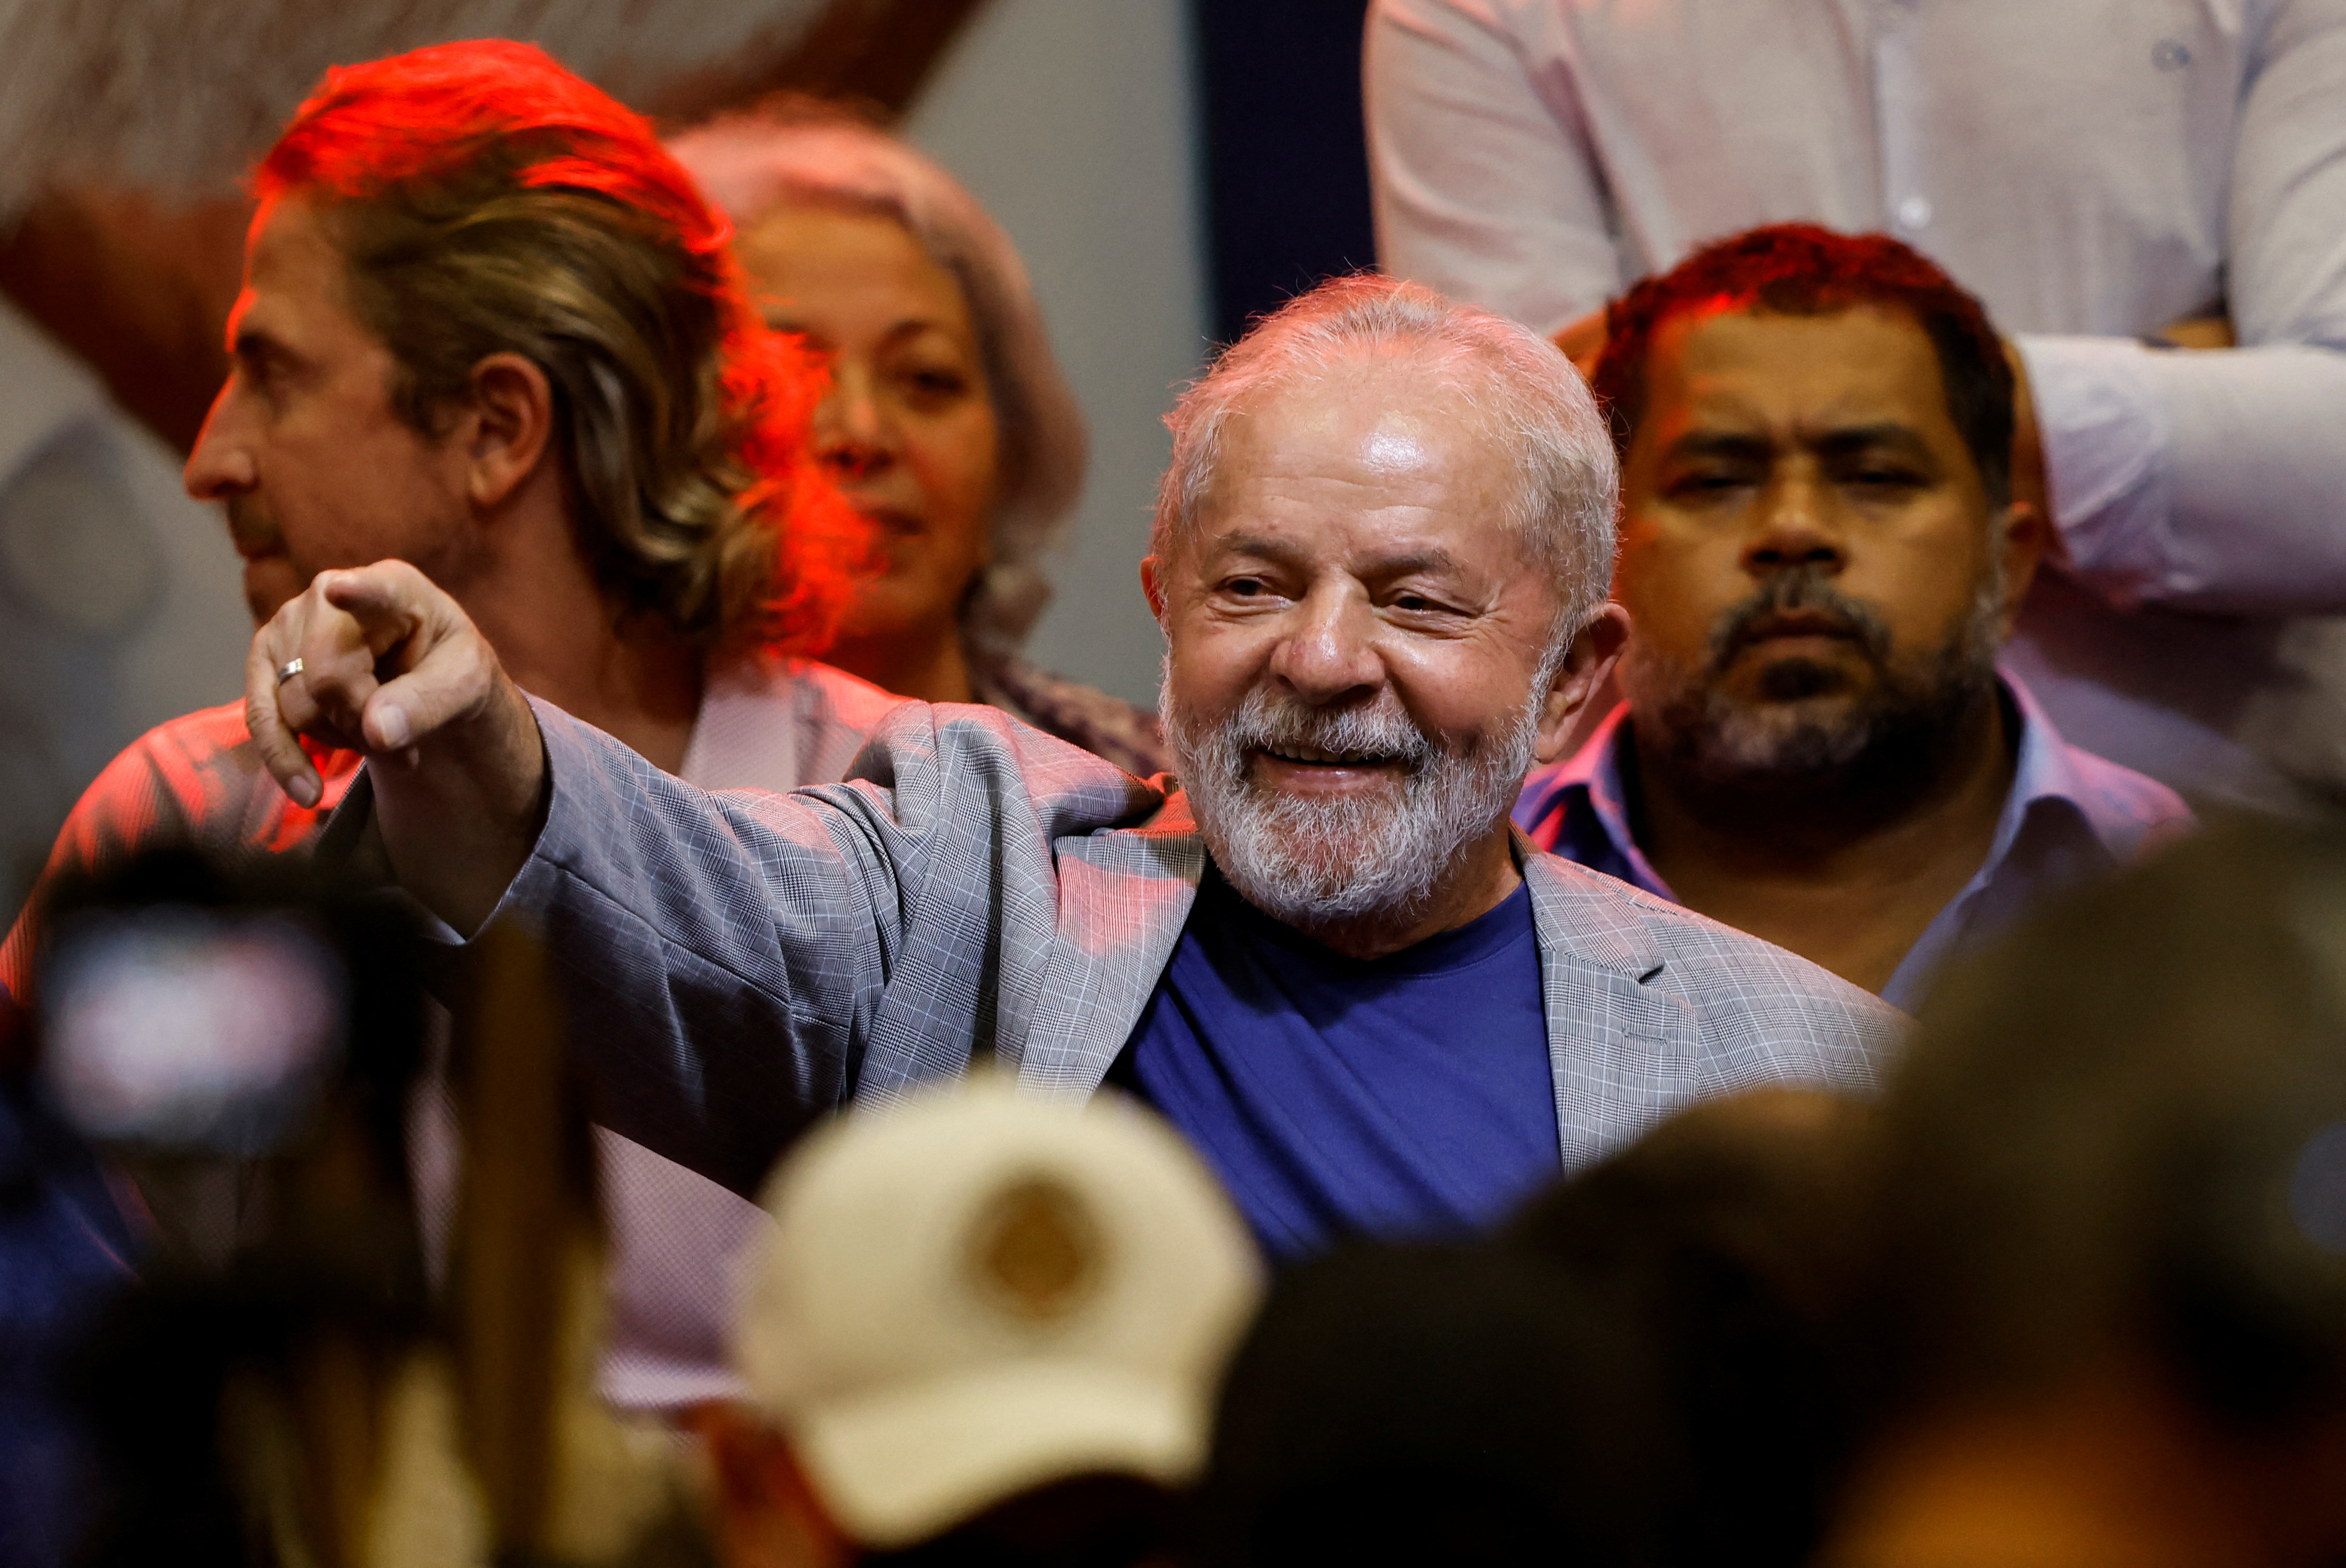 Brazil's former President Luiz Inacio Lula da Silva attends an event of the Workers Party (PT), in Curitiba